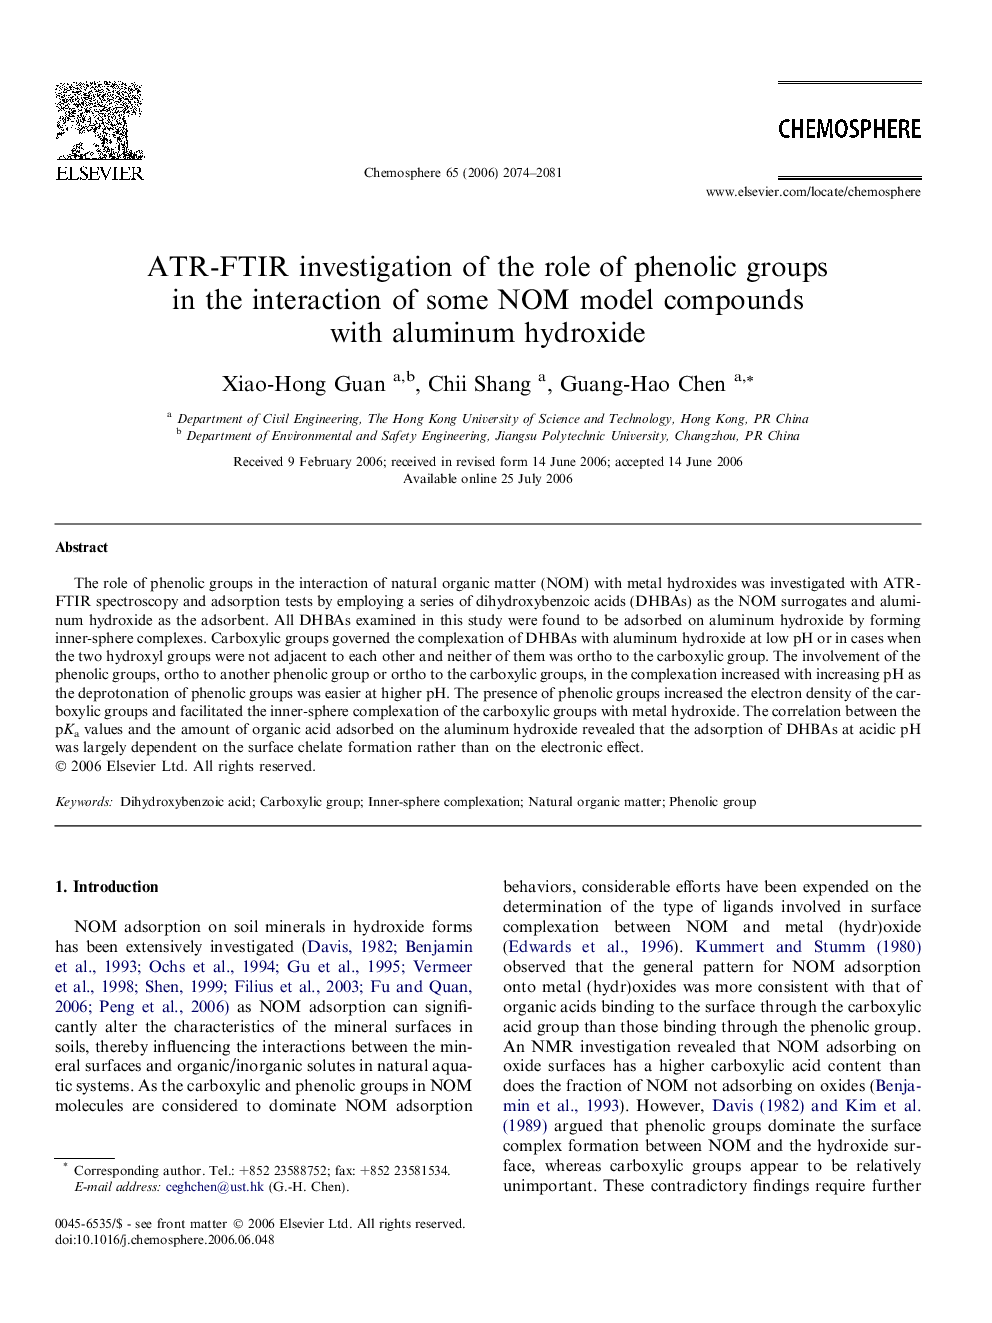 ATR-FTIR investigation of the role of phenolic groups in the interaction of some NOM model compounds with aluminum hydroxide